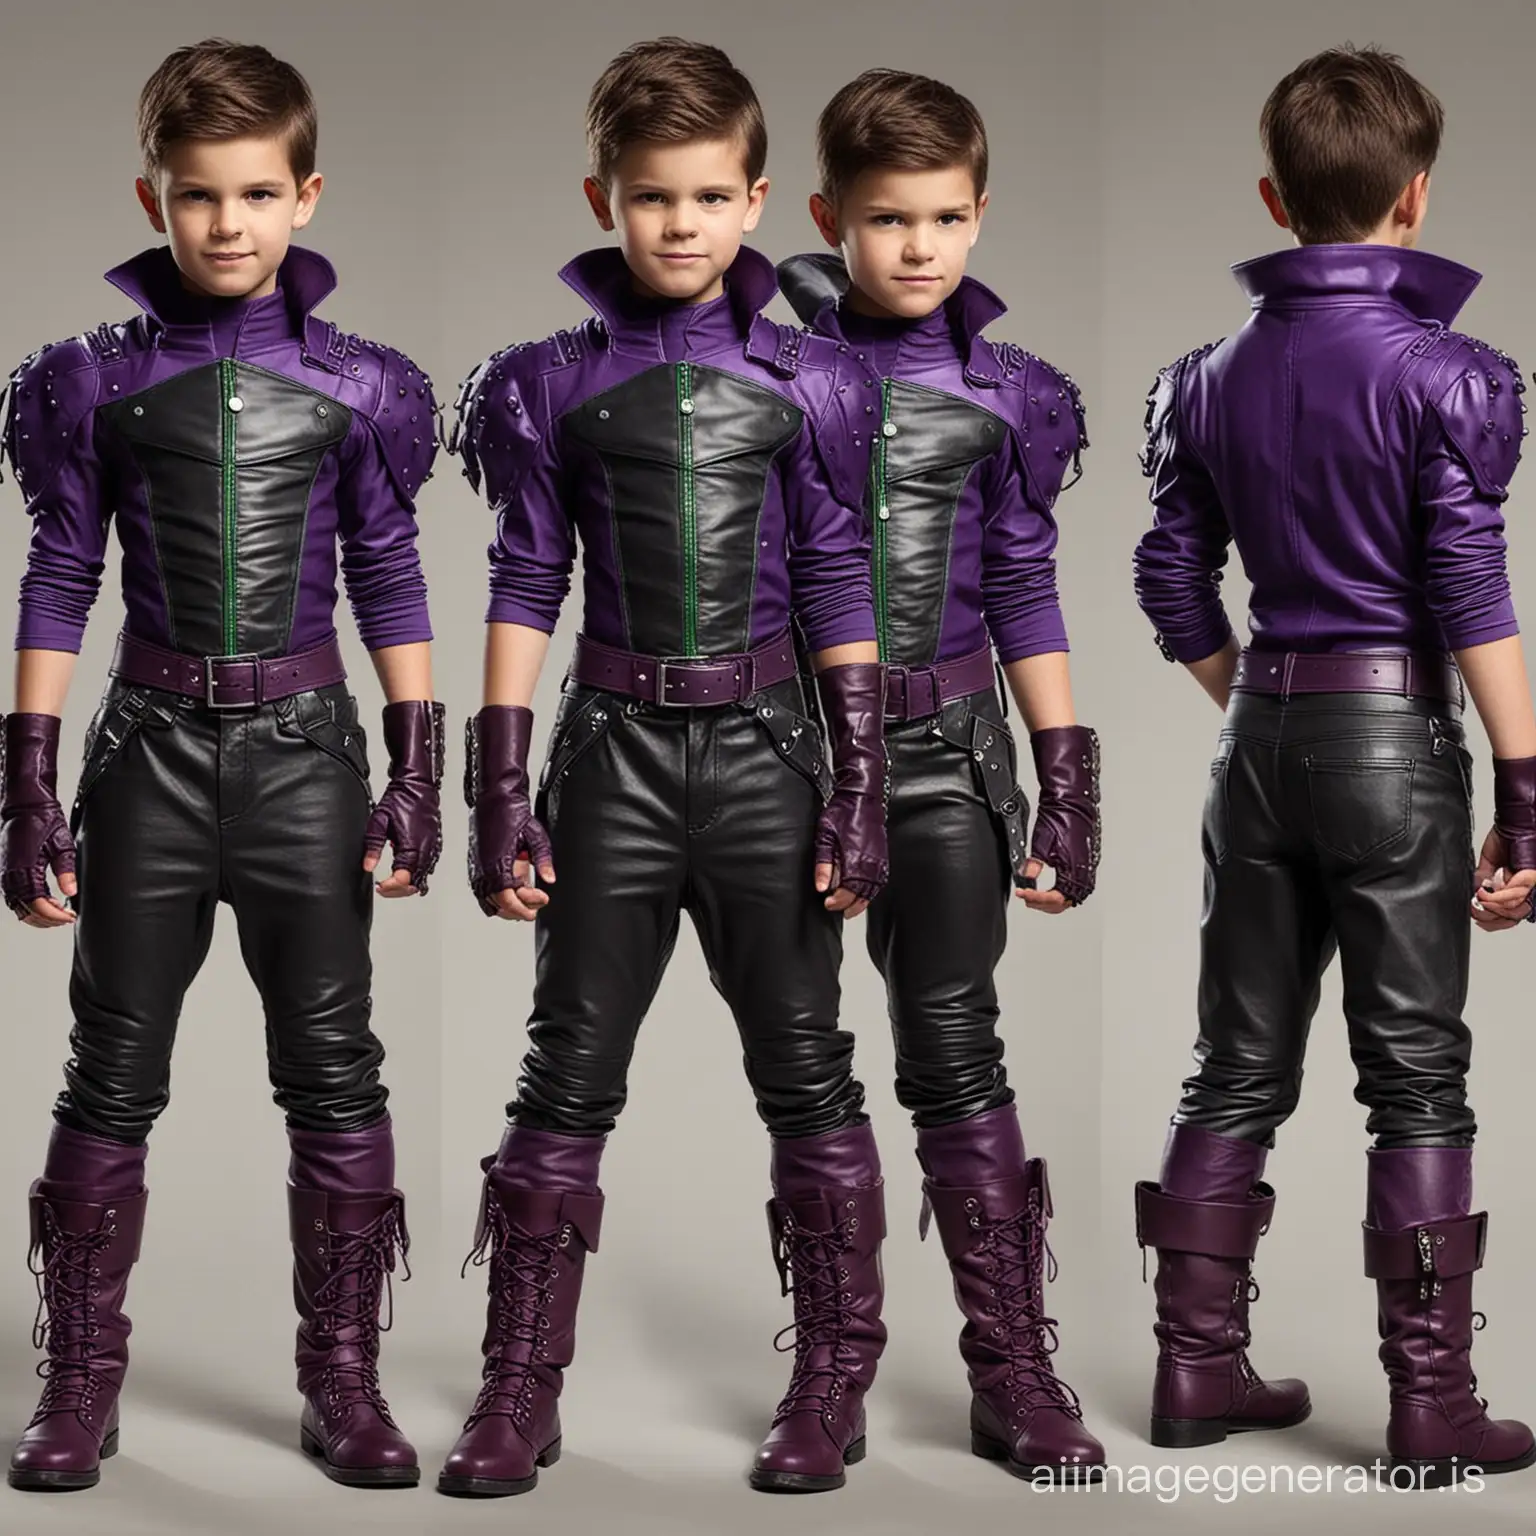 8YearOld-Boy-Villain-in-Intimidating-Purple-Leather-Outfit-with-Red-and-Green-Accents